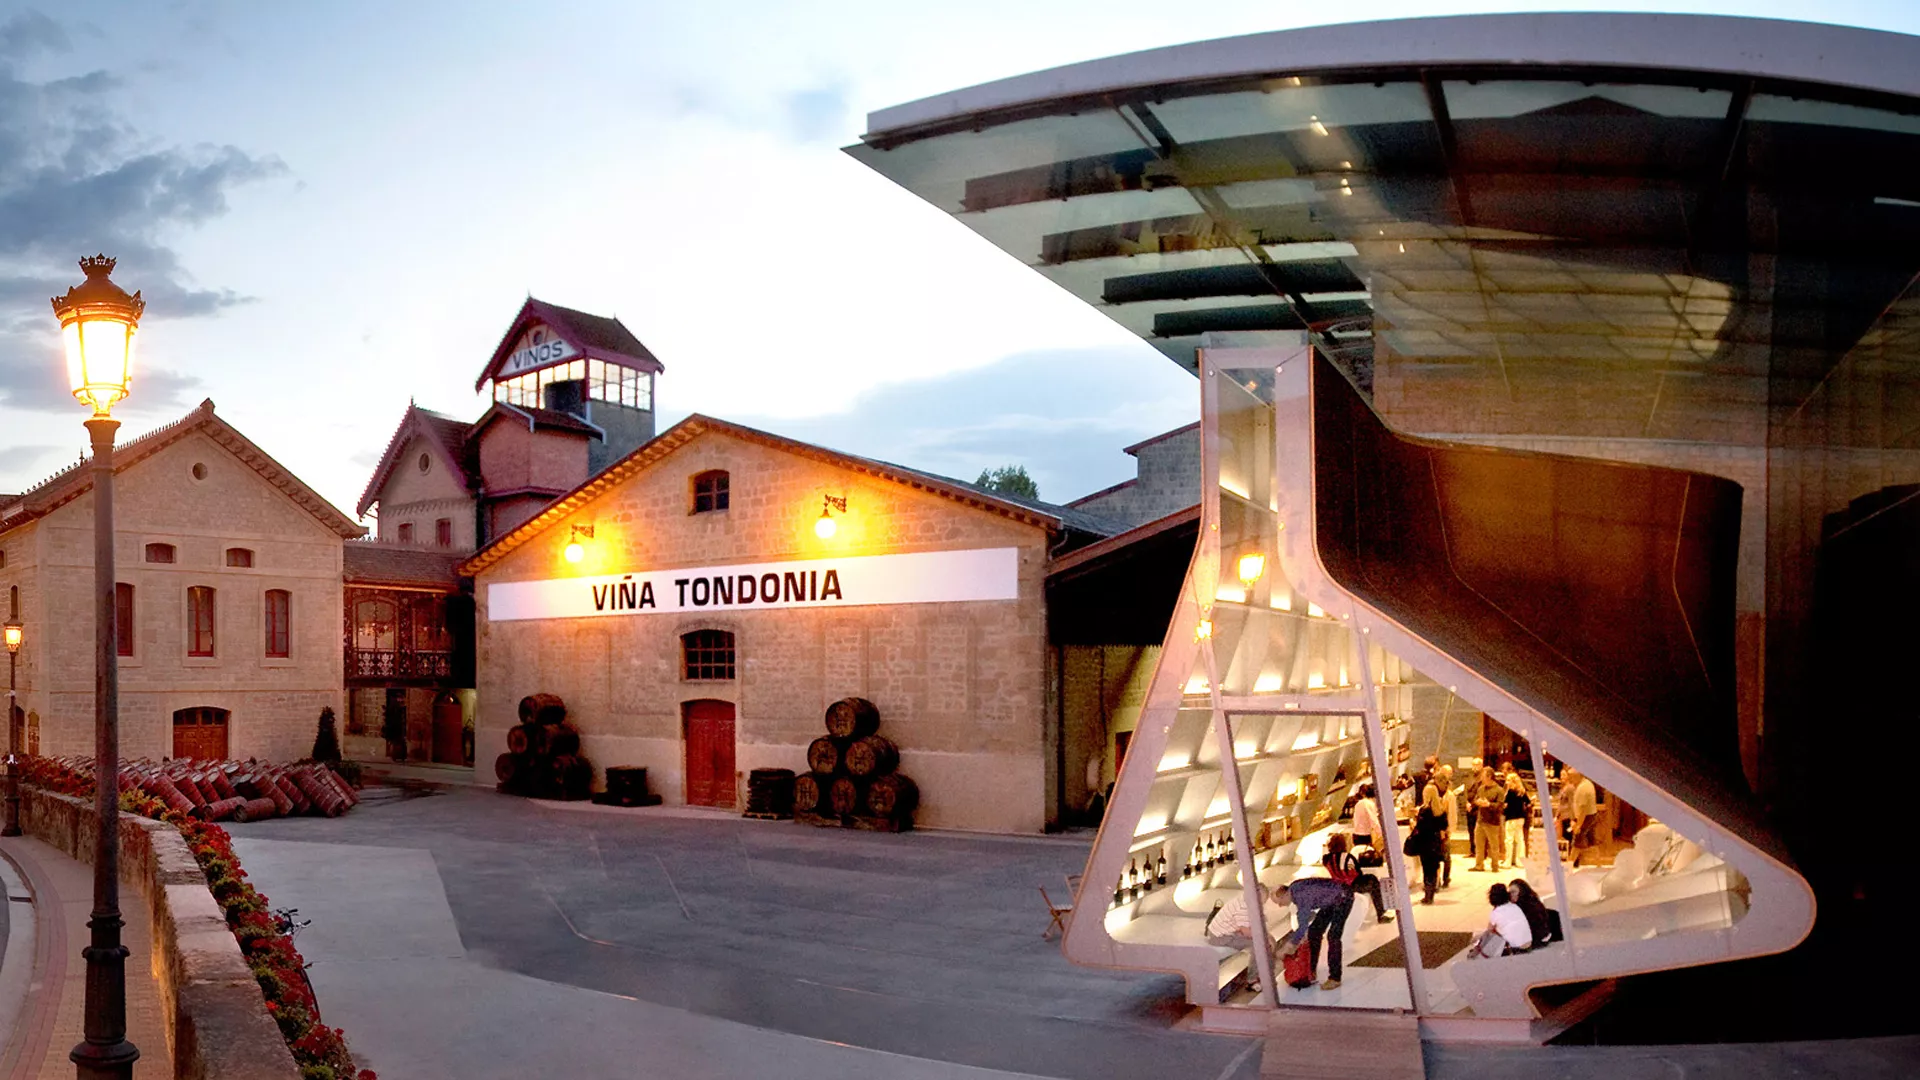 R. Lopez de Heredia Vina Tondonia, S.A. in Spain, Europe | Wineries - Rated 3.7